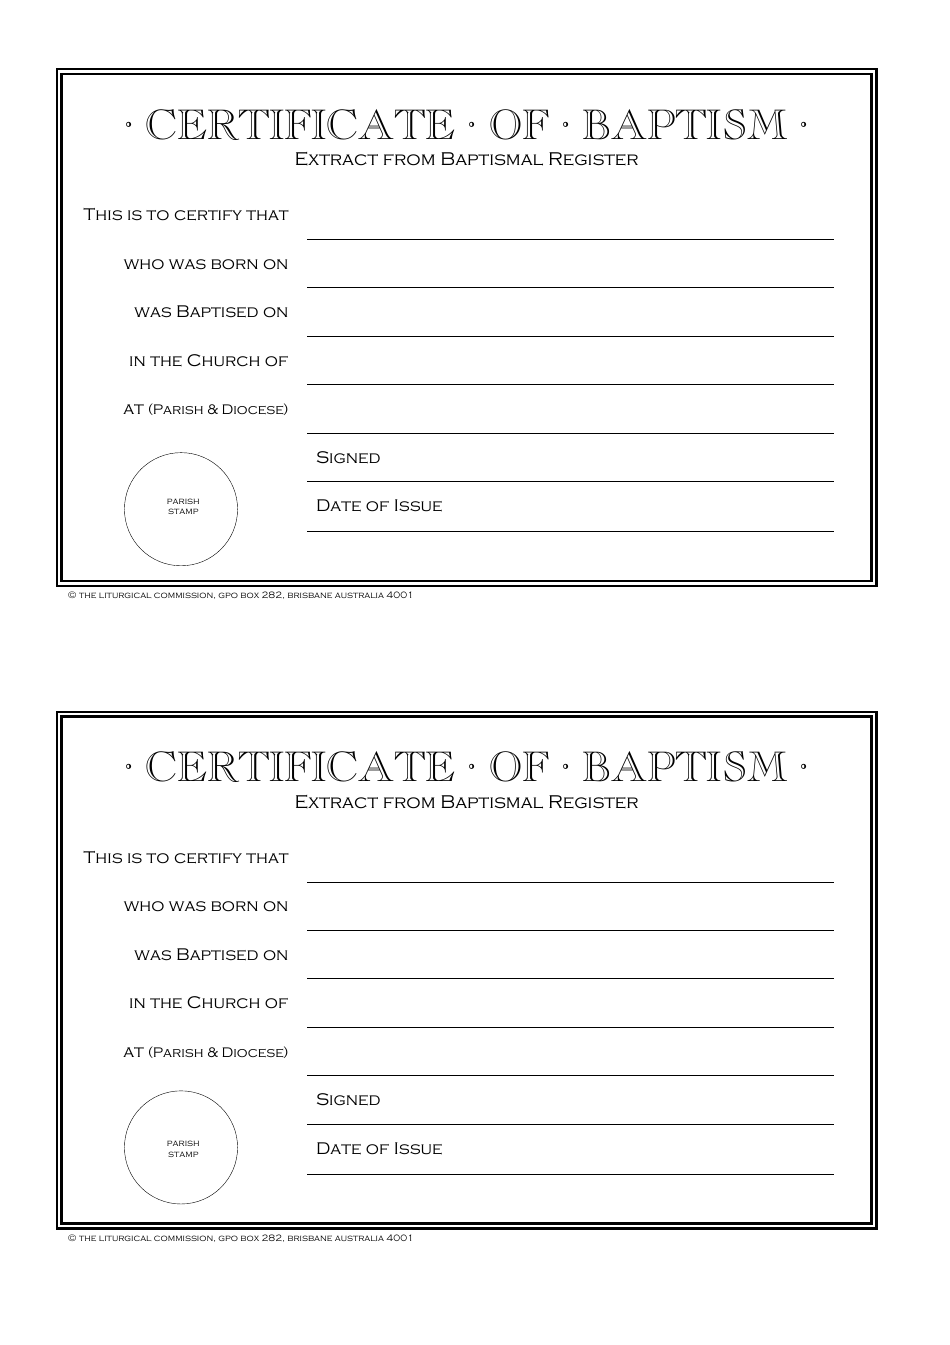 Certificate of Baptism Template - the Liturgical Commission